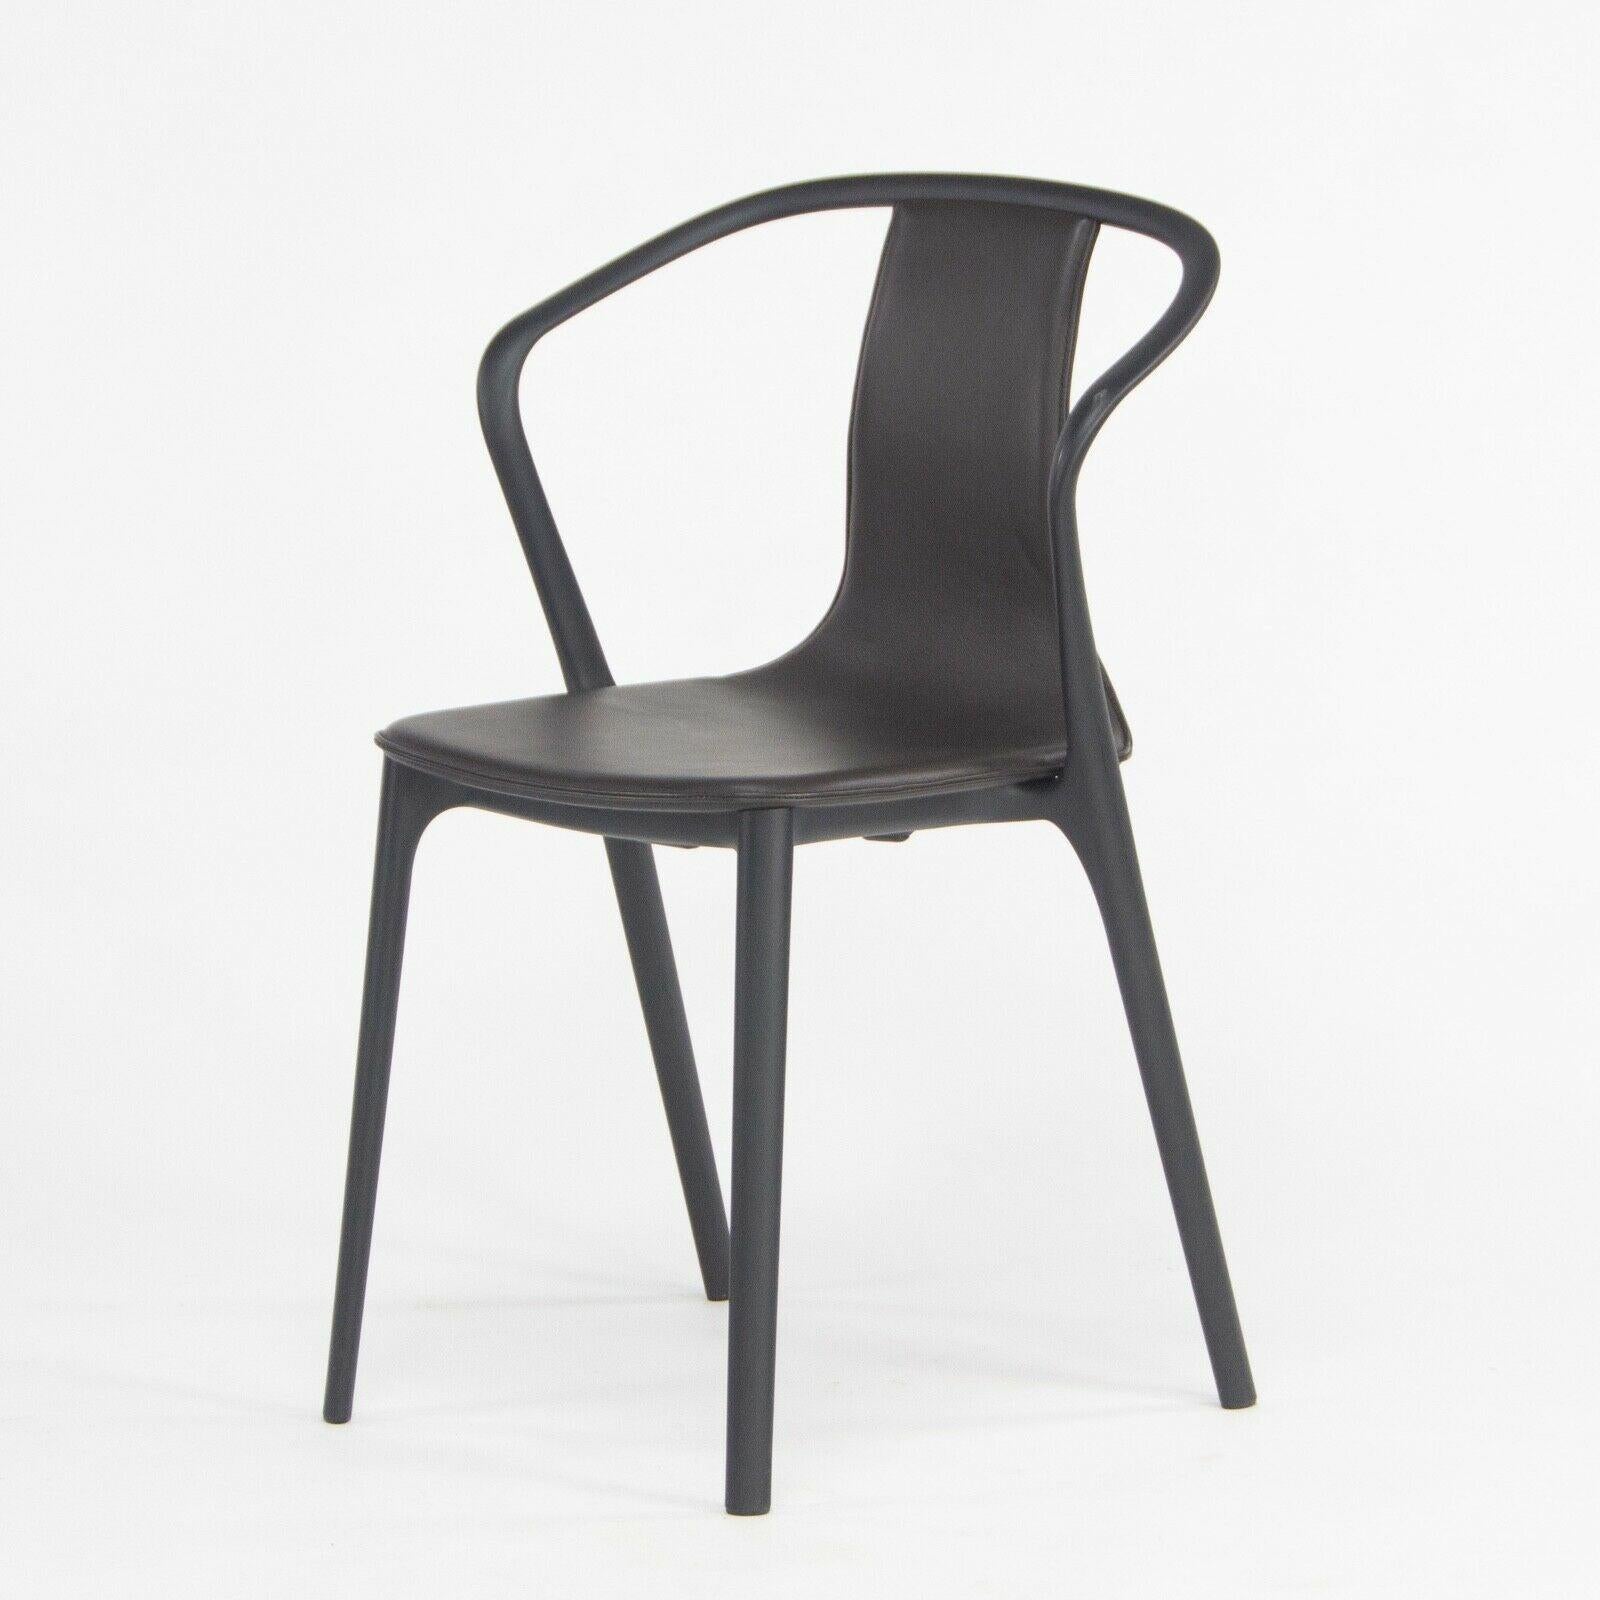 Modern C. 2019 Vitra Belleville Armchair in Brown Leather by Ronan & Erwan Bouroullec For Sale